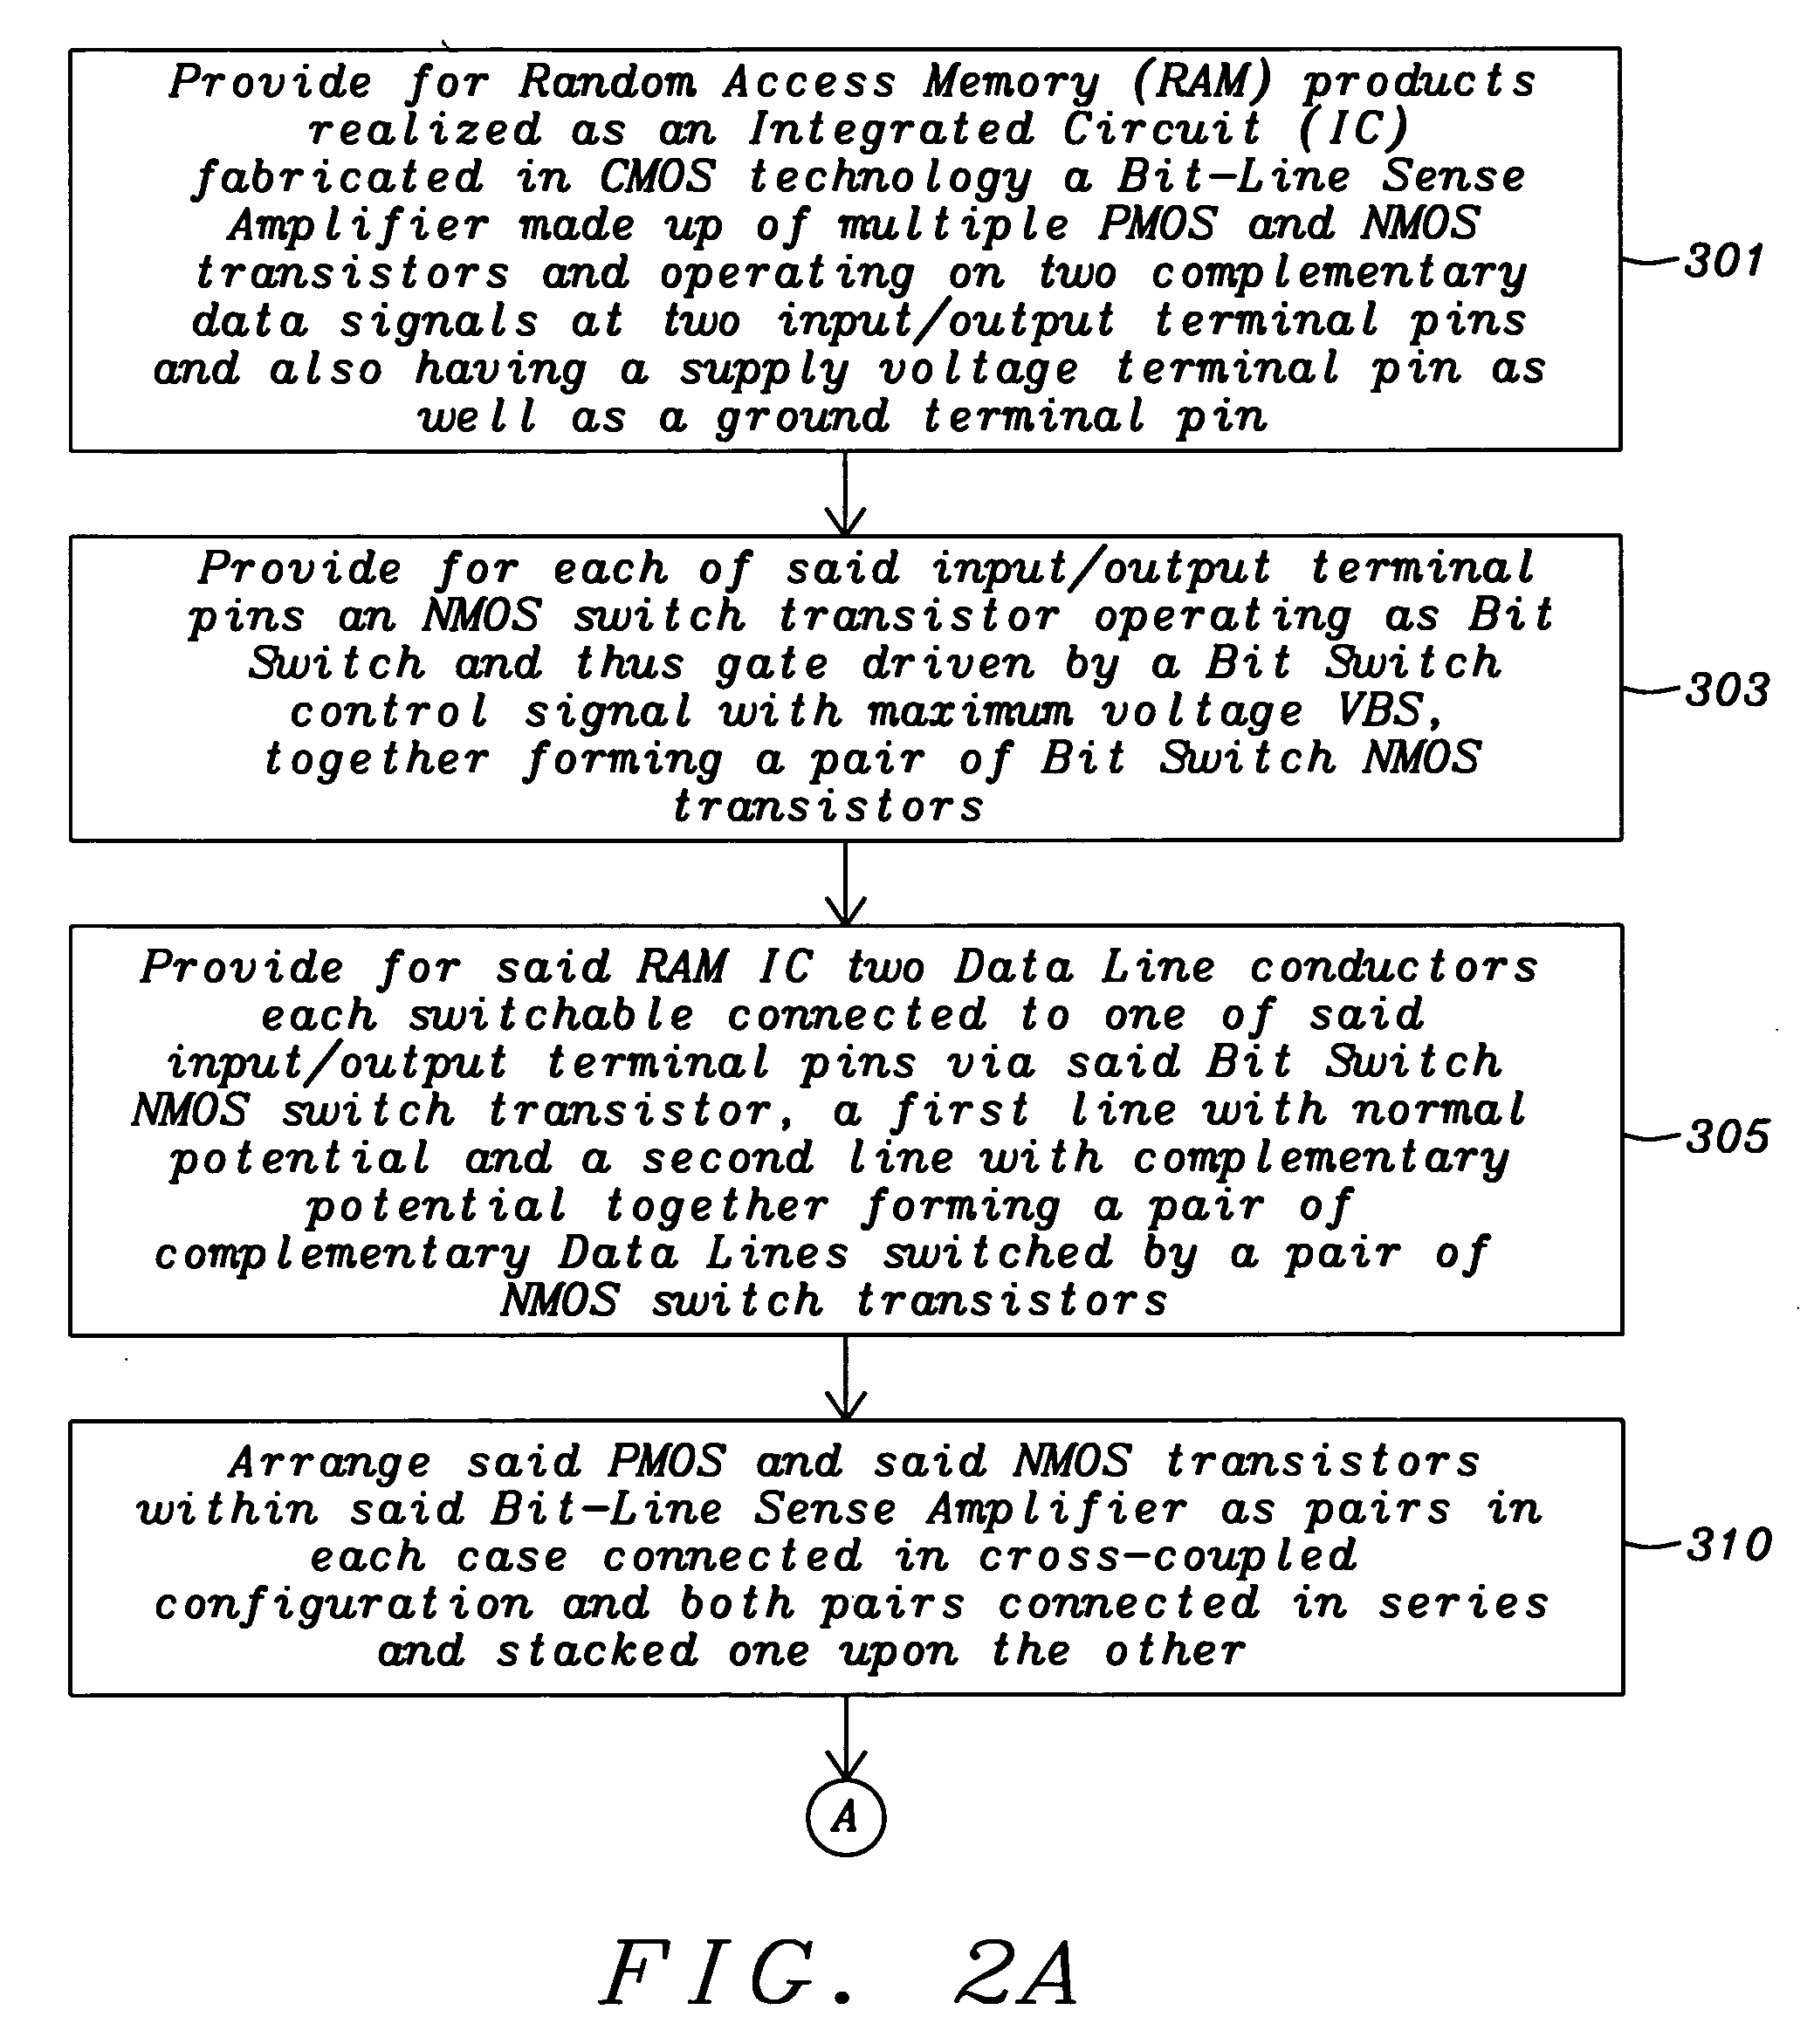 Method to improve the write speed for memory products